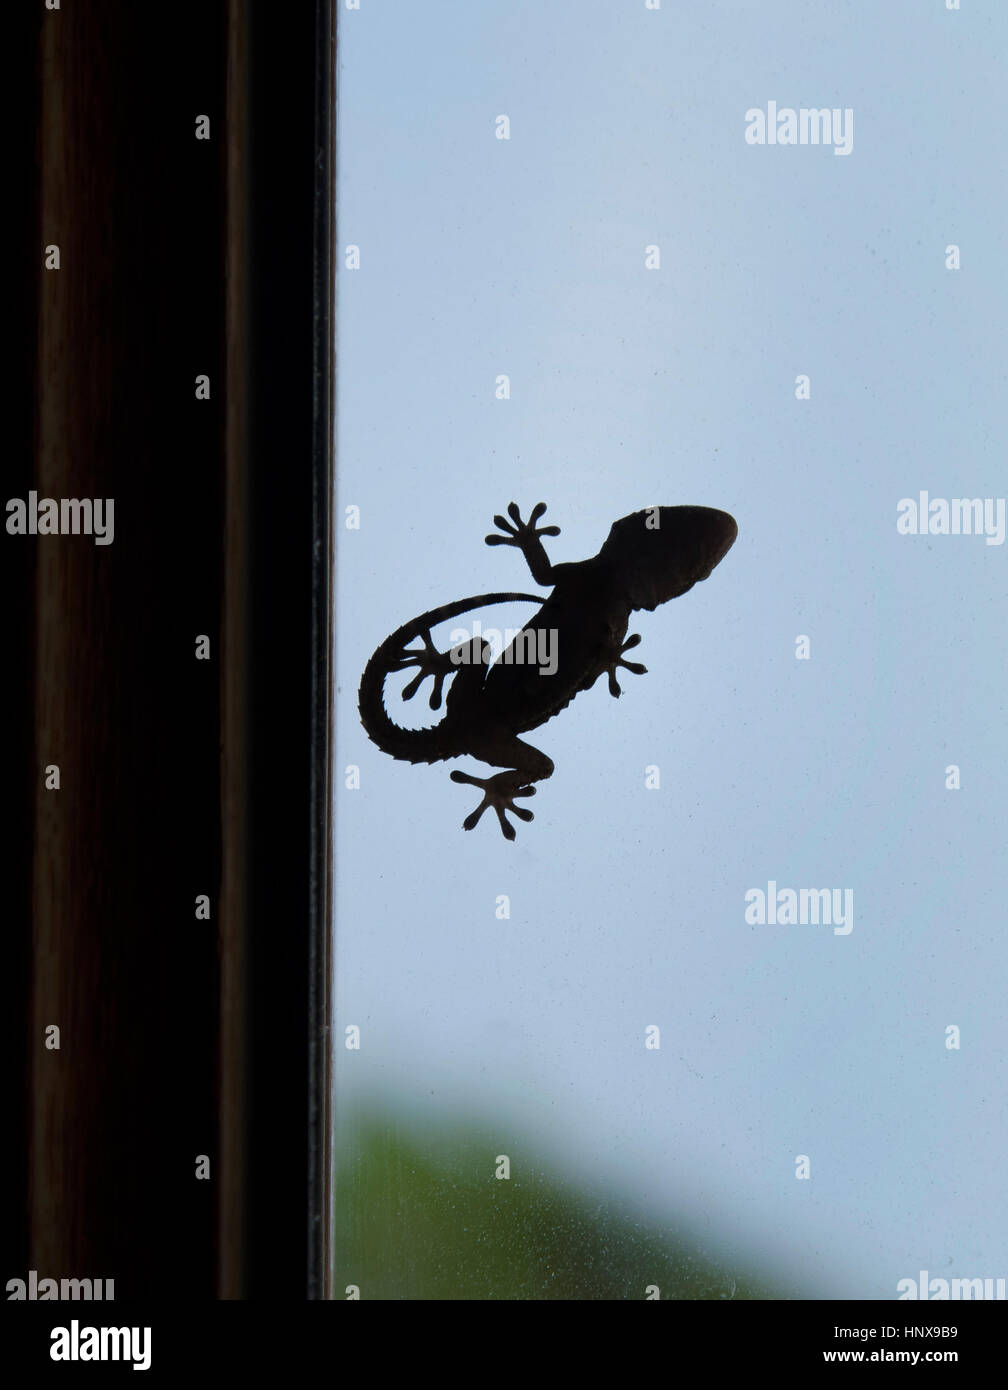 Silhouette of gecko that can be used as logo Stock Photo